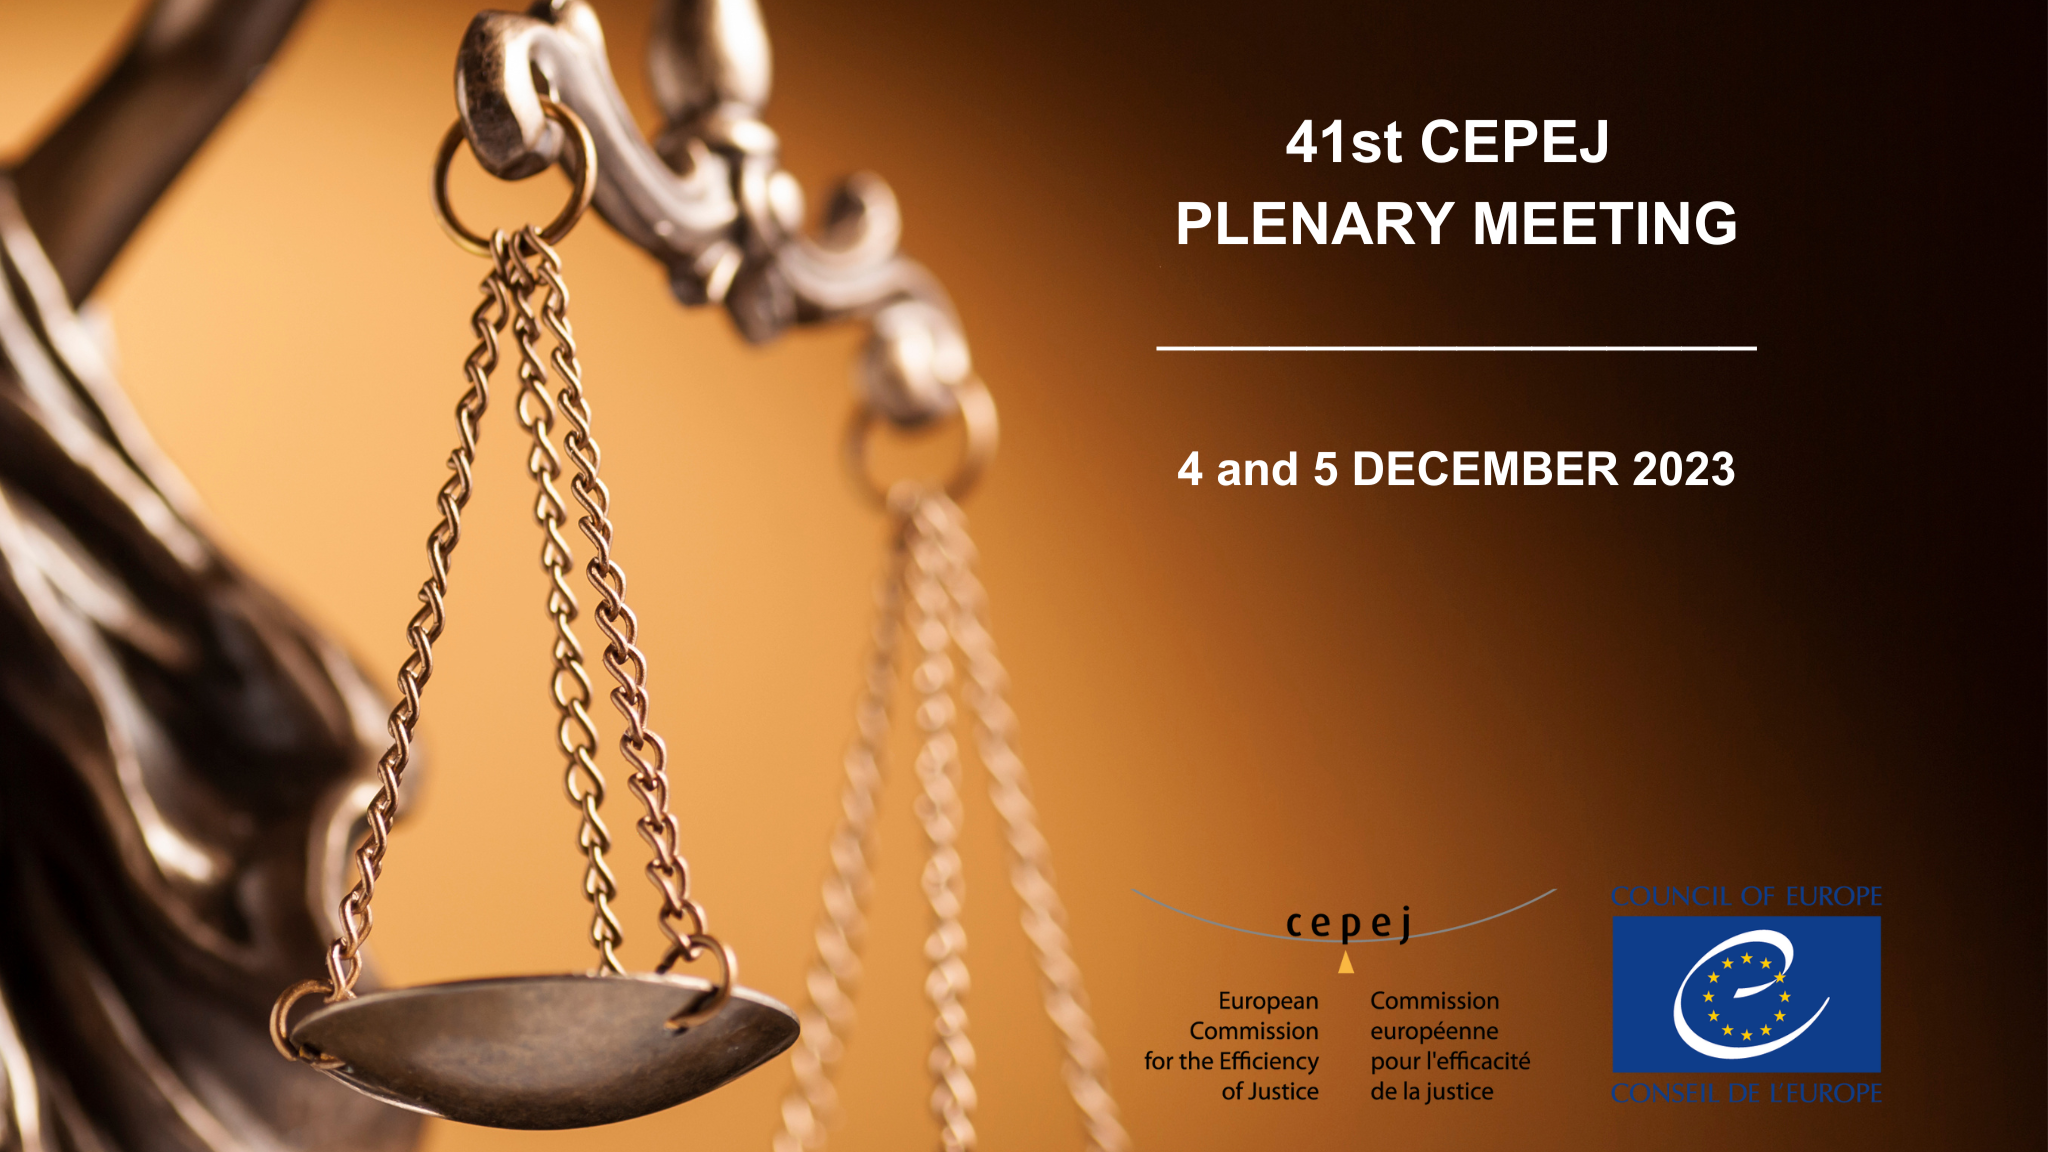 The 41st CEPEJ Plenary meeting will be held on 4 and 5 December in Strasbourg